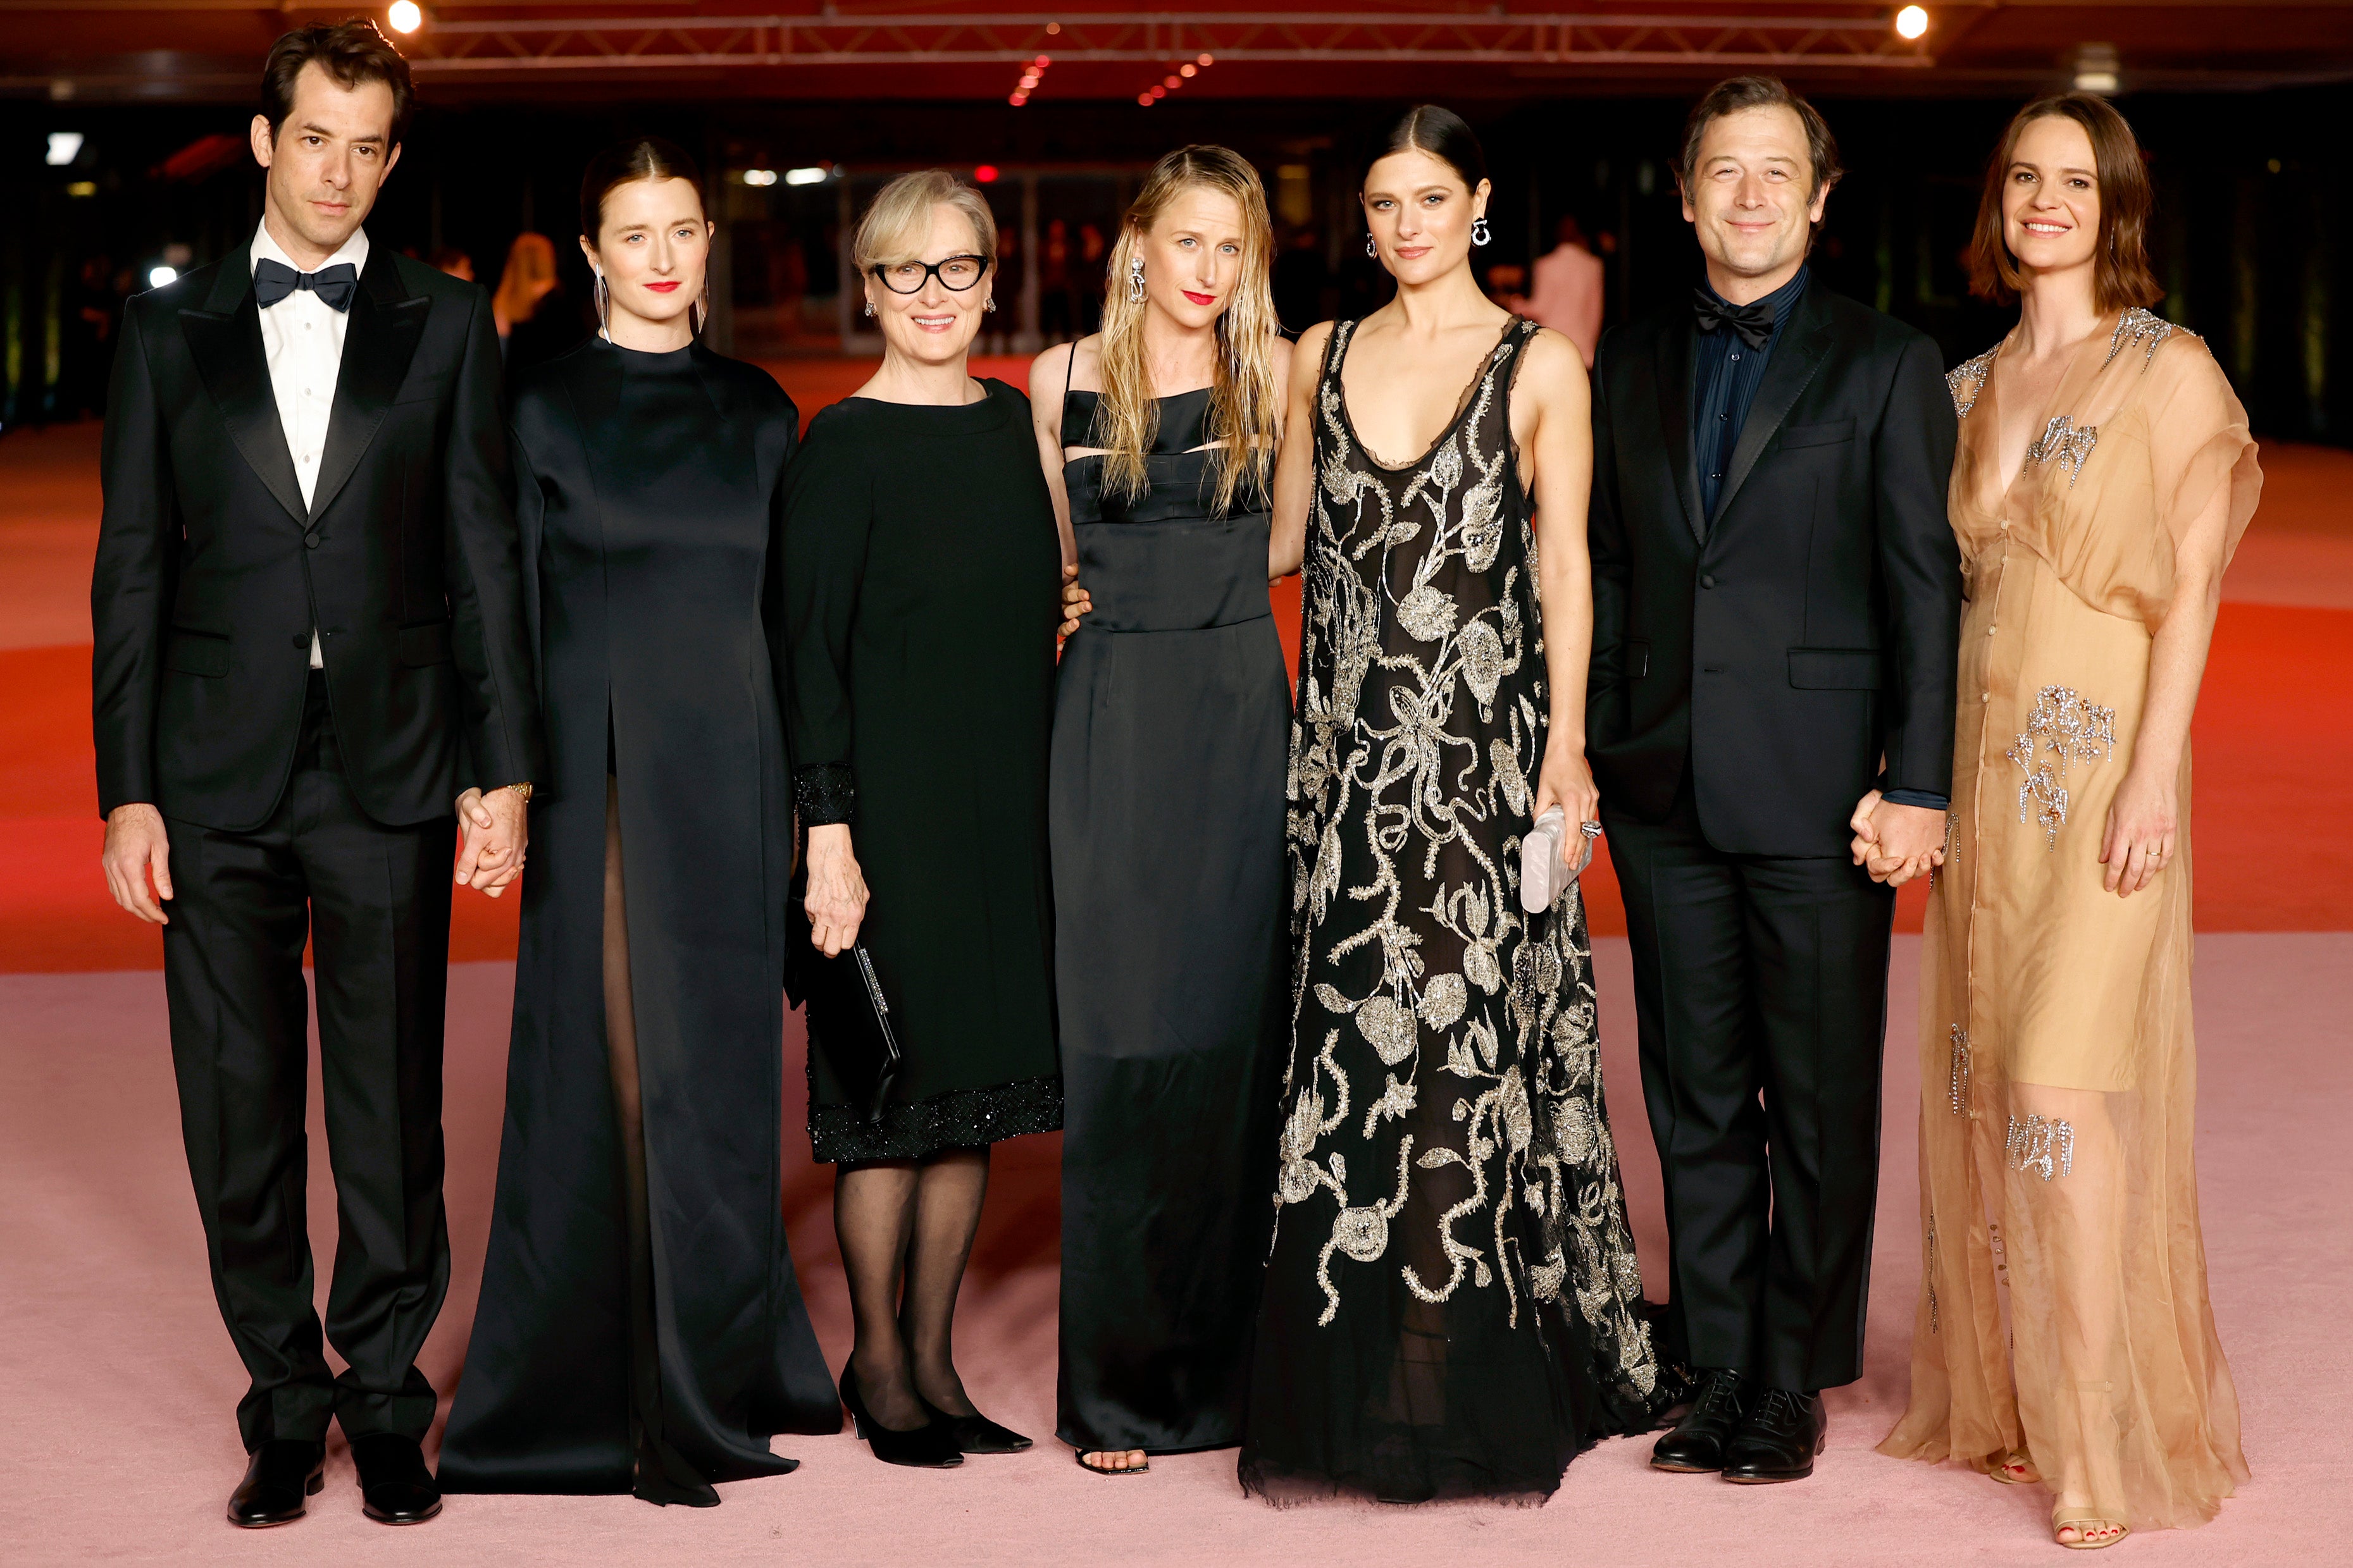 Meryl Streep shares four children – Henry, Mamie, Grace, and Louisa – with ex Don Gummer